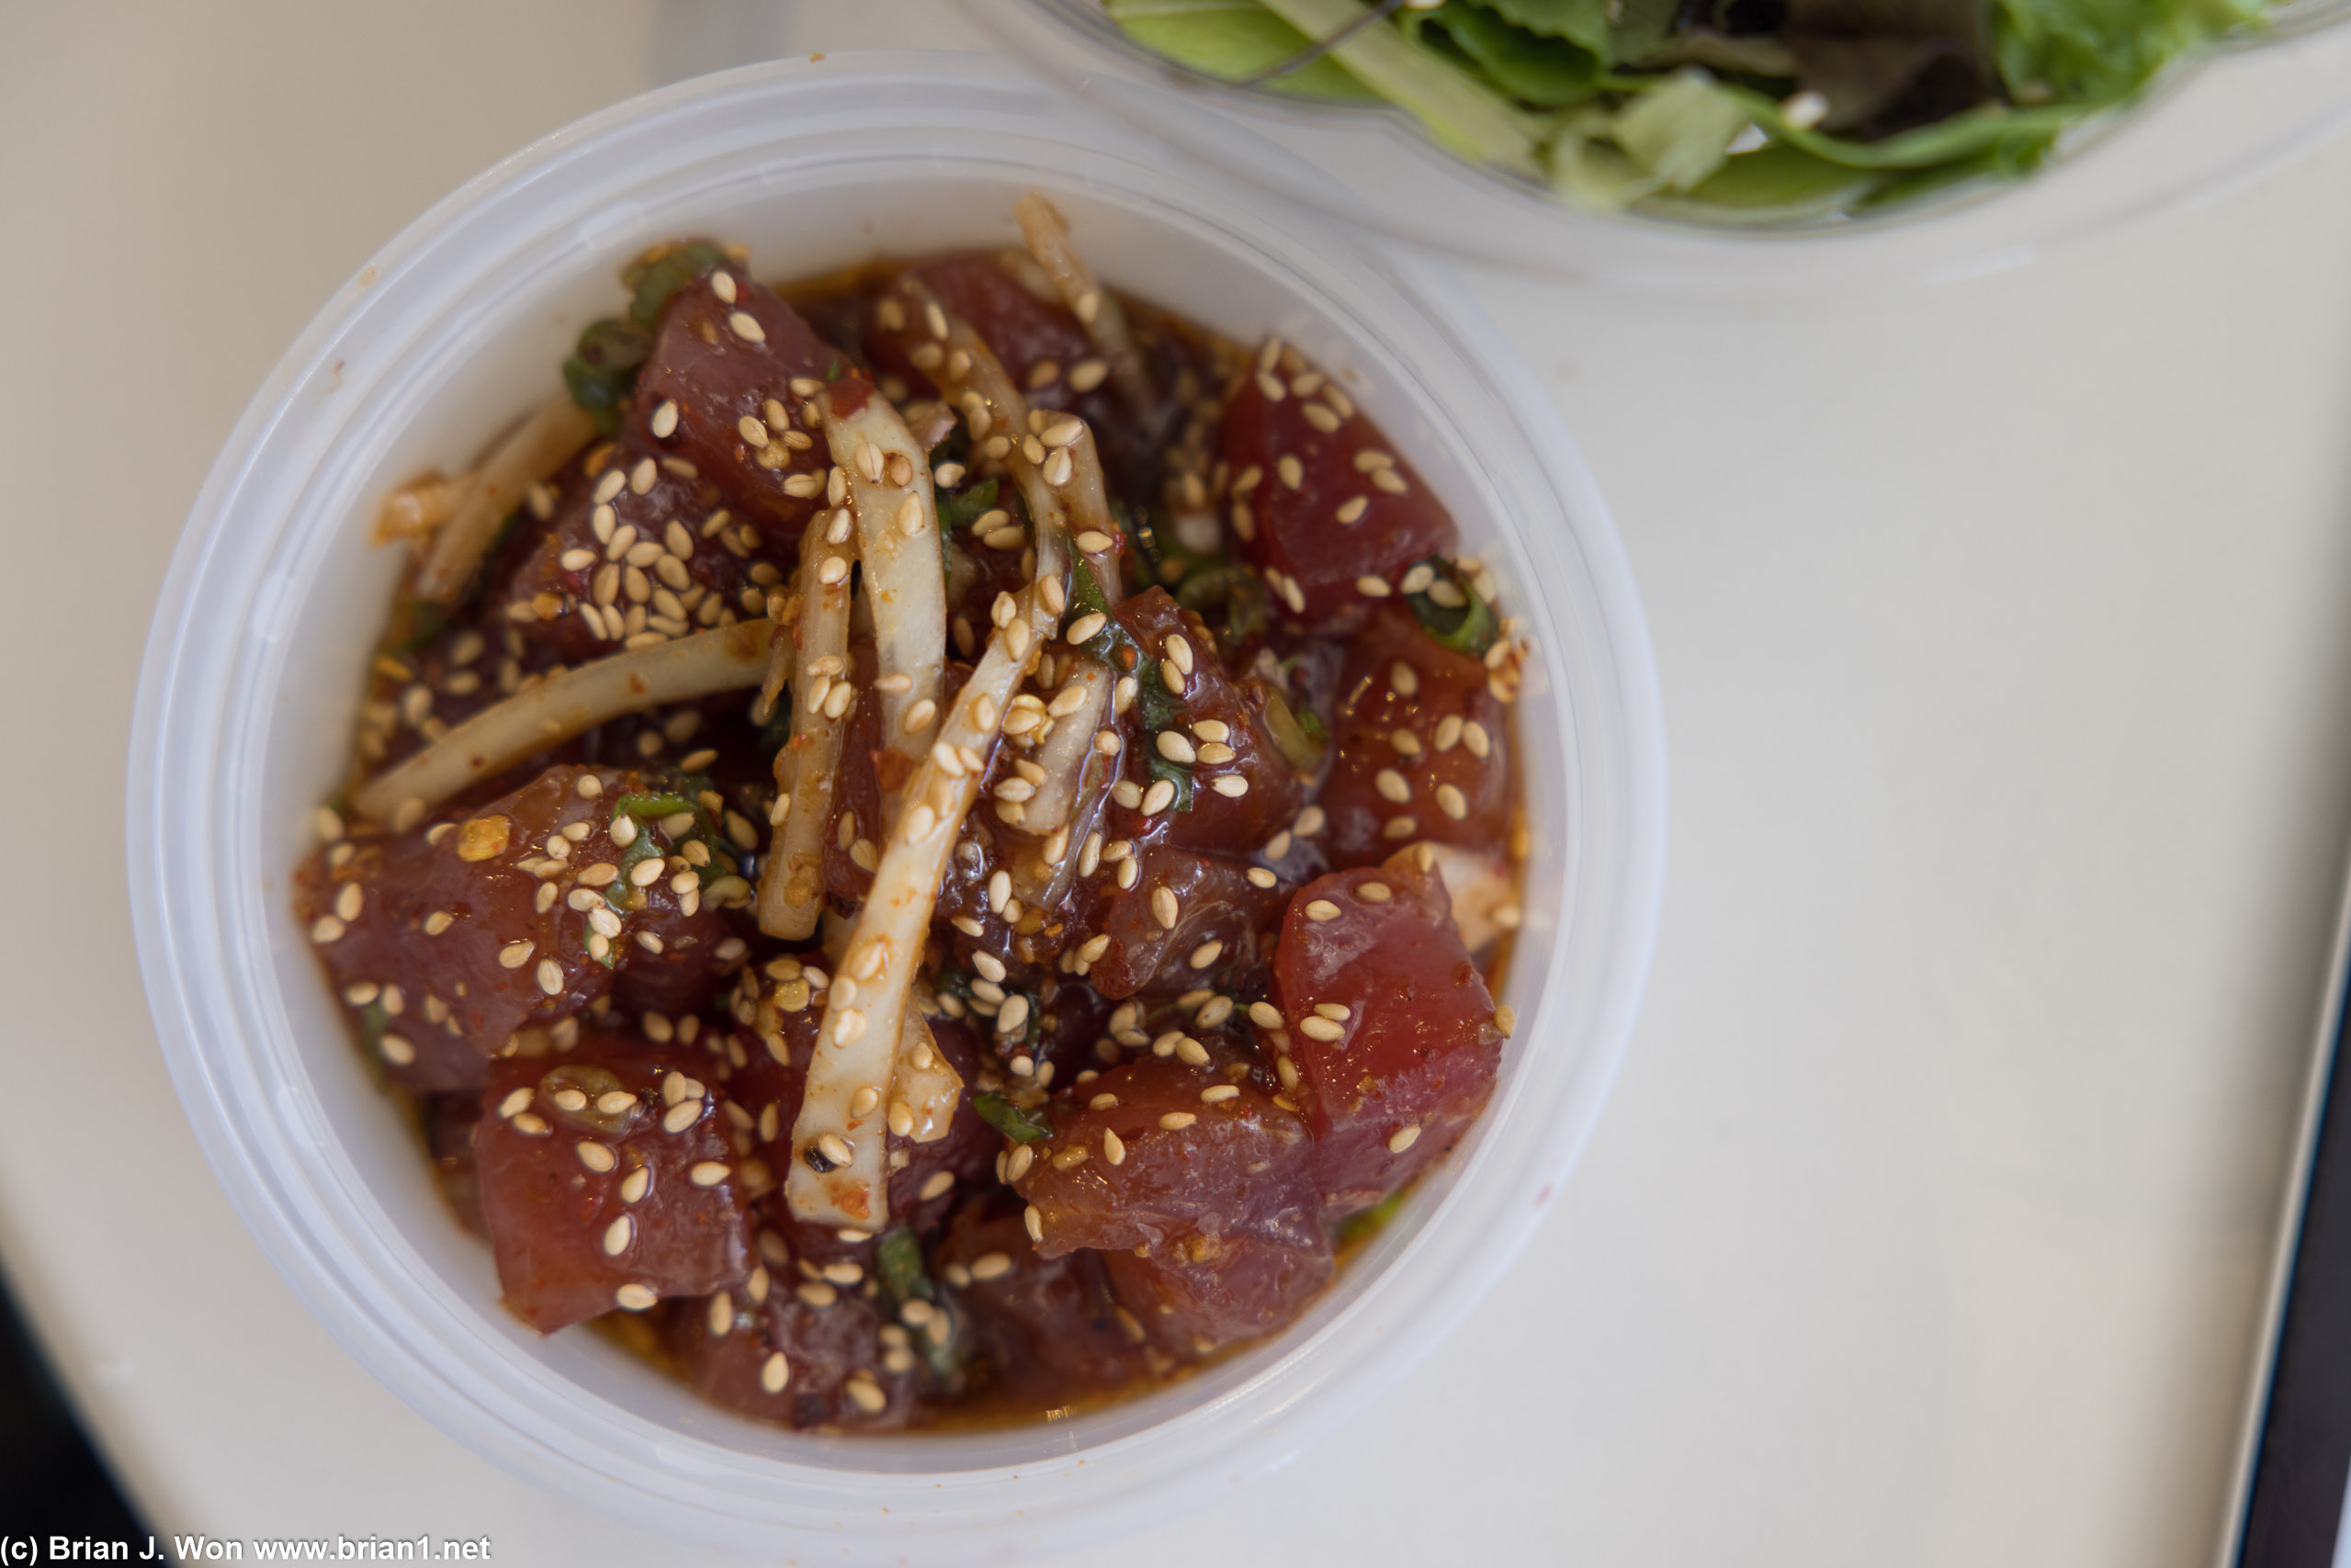 Spicy poke is forgettable.